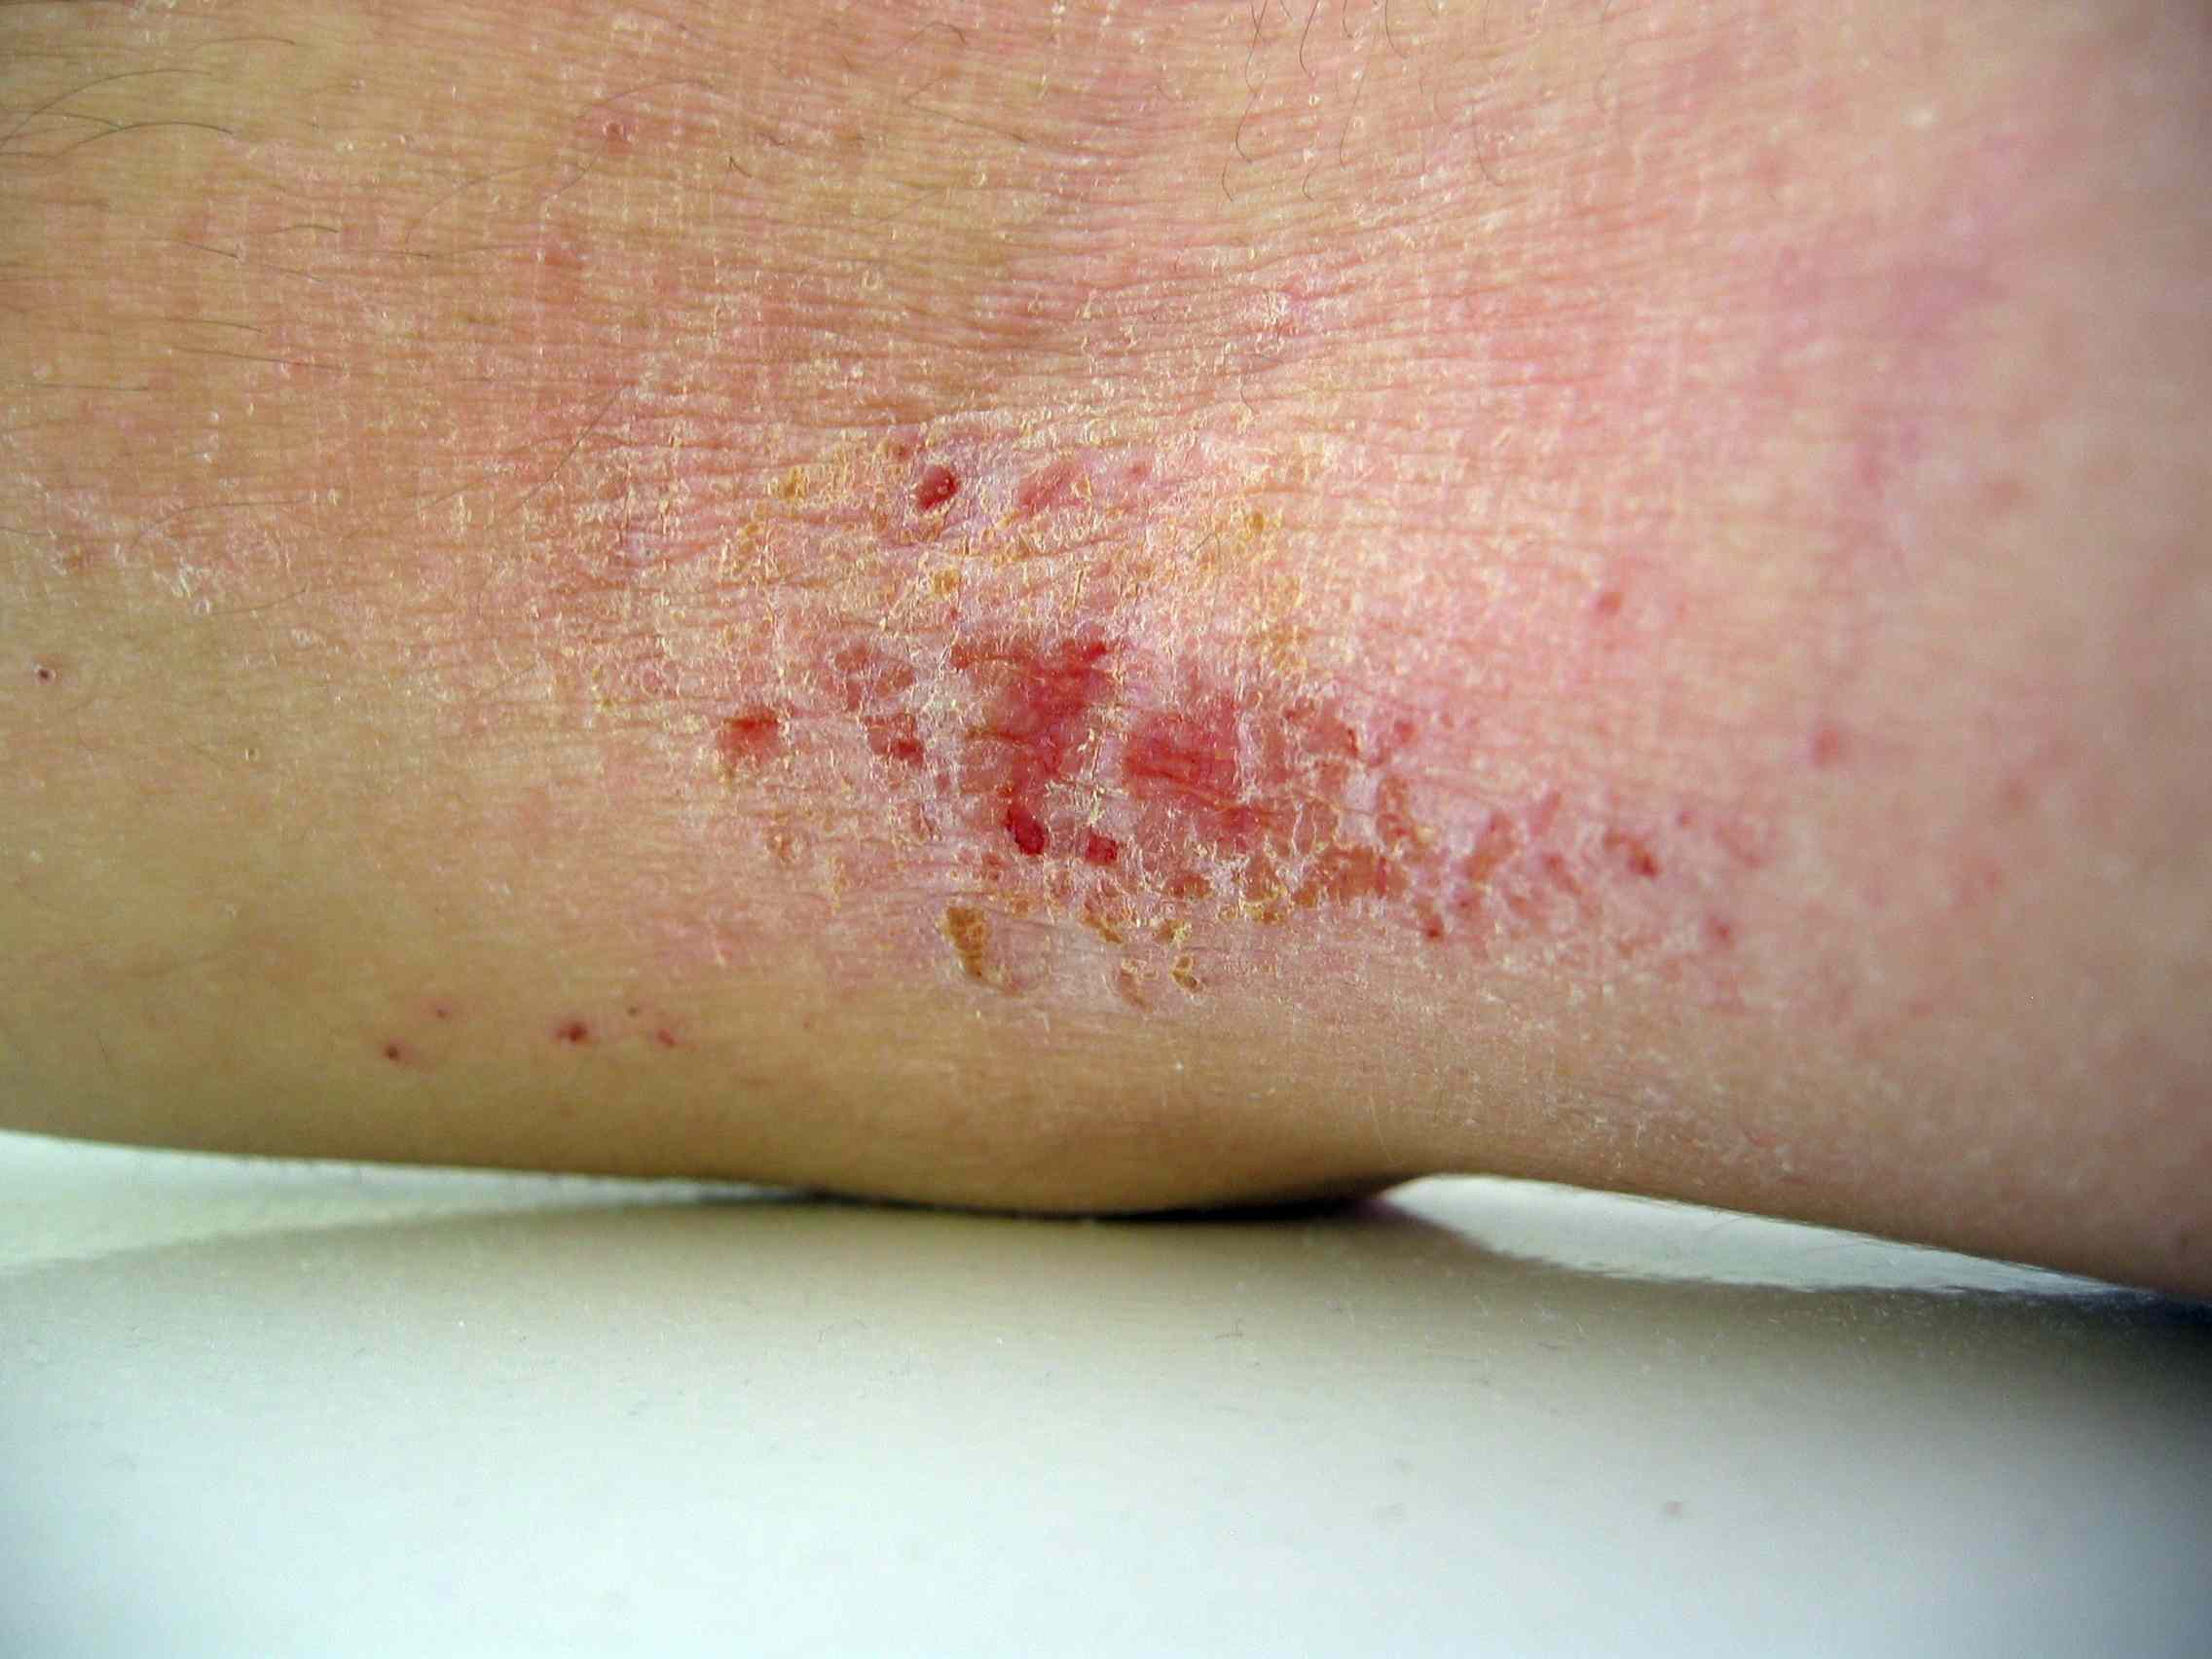 Skin Rashes Types and Causes in Children